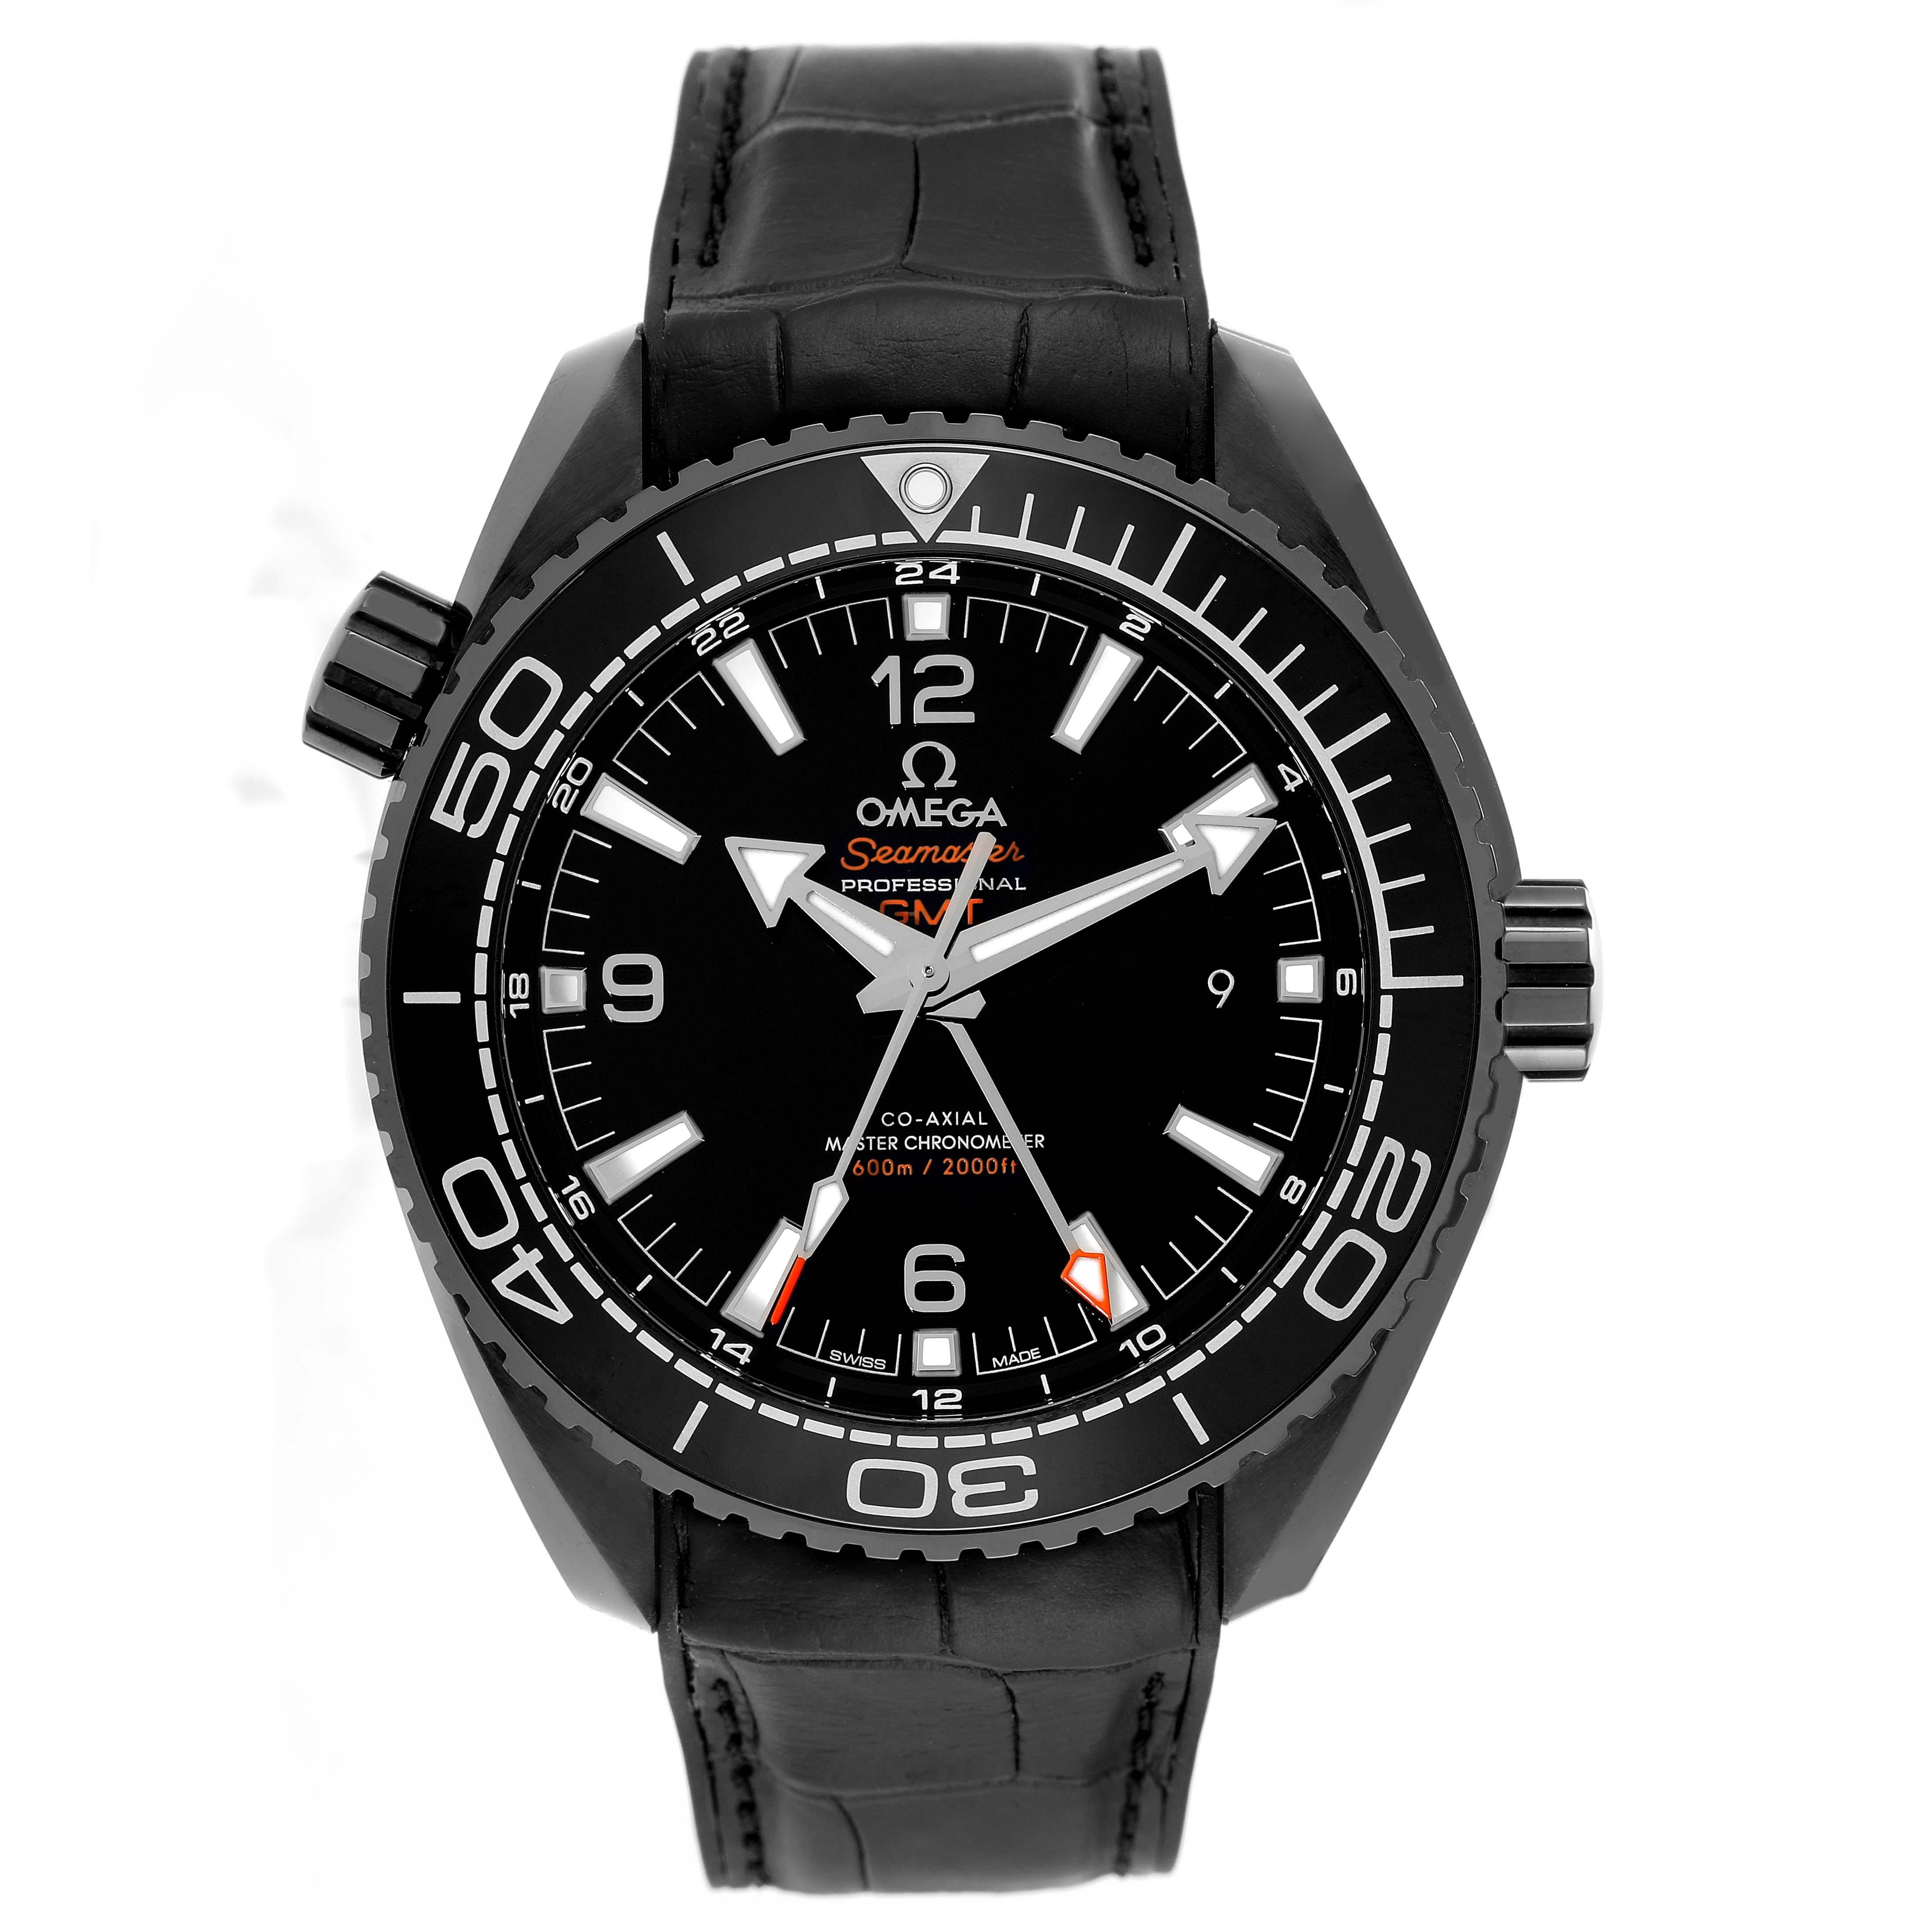 Omega Planet Ocean GMT Ceramic Mens Watch 215.92.46.22.01.001 Box Card. Automatic self-winding movement with Co-Axial escapement. Certified Master Chronometer, approved by METAS,resistant to magnetic fields reaching 15,000 gauss. GMT and time zone